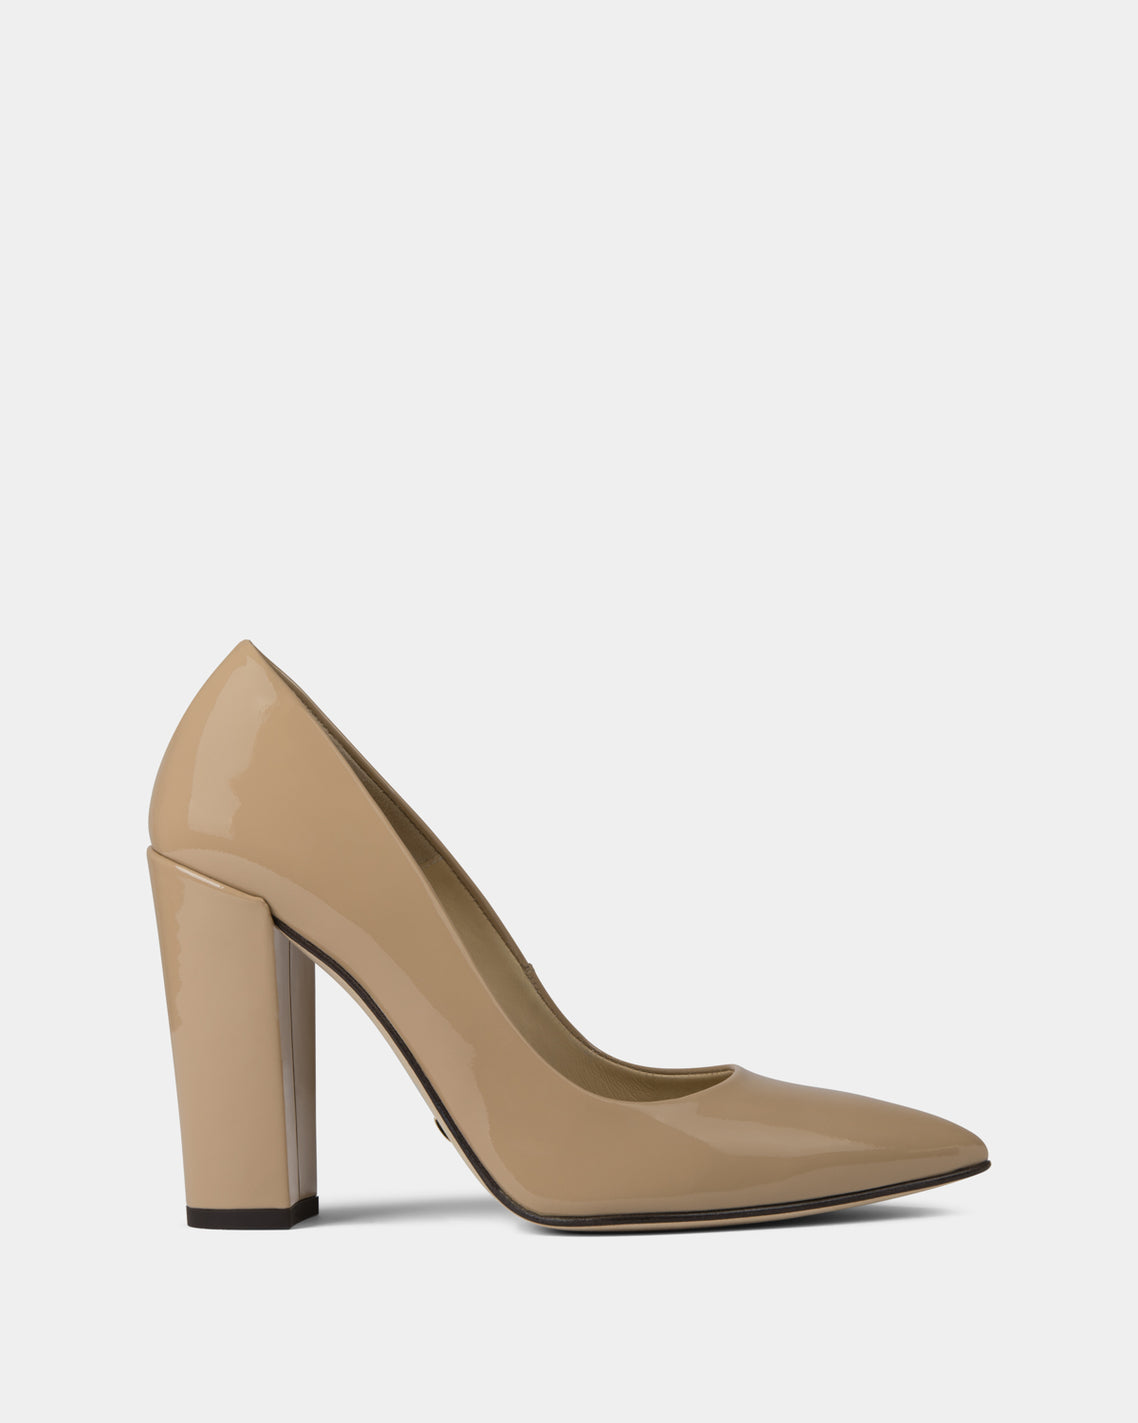 kallu-kallú-beige-patent-leather-shoes-for-women-made-in-spain-heels-shoes-high-heels-pums